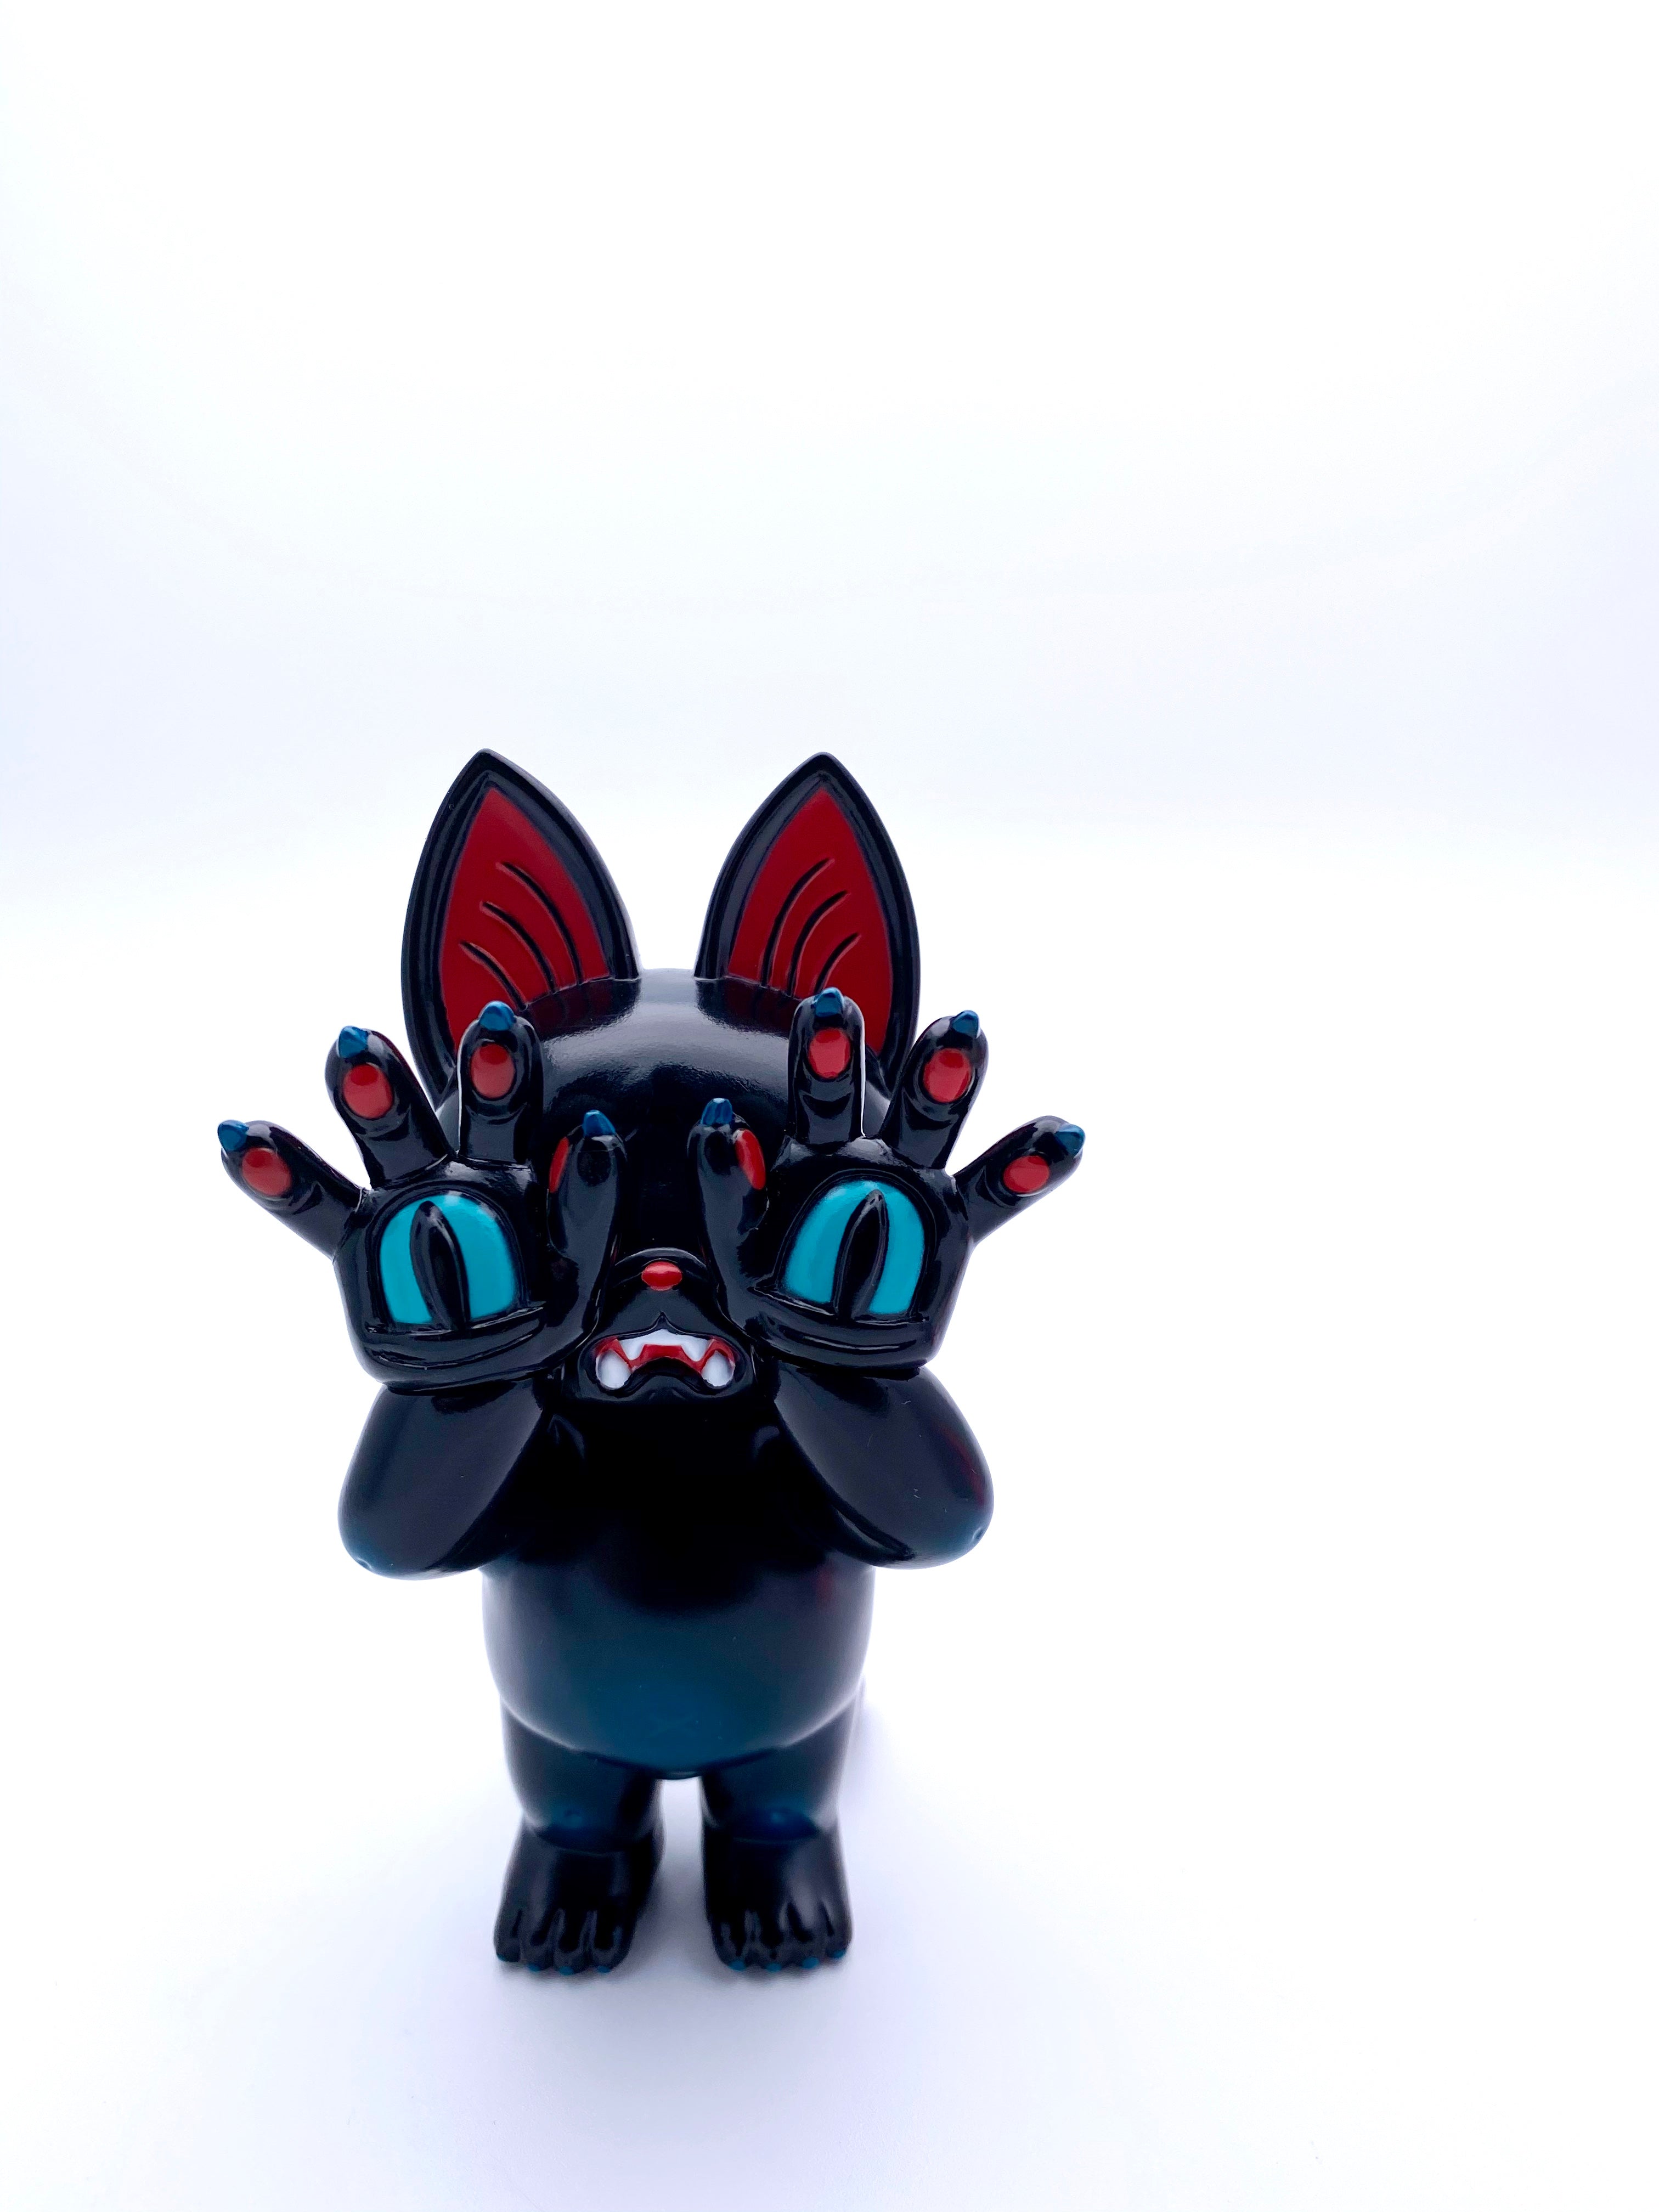 A Japanese soft vinyl toy of ONIGIRI - Black by Grape Brain, featuring a black cat figurine with red ears and hands.